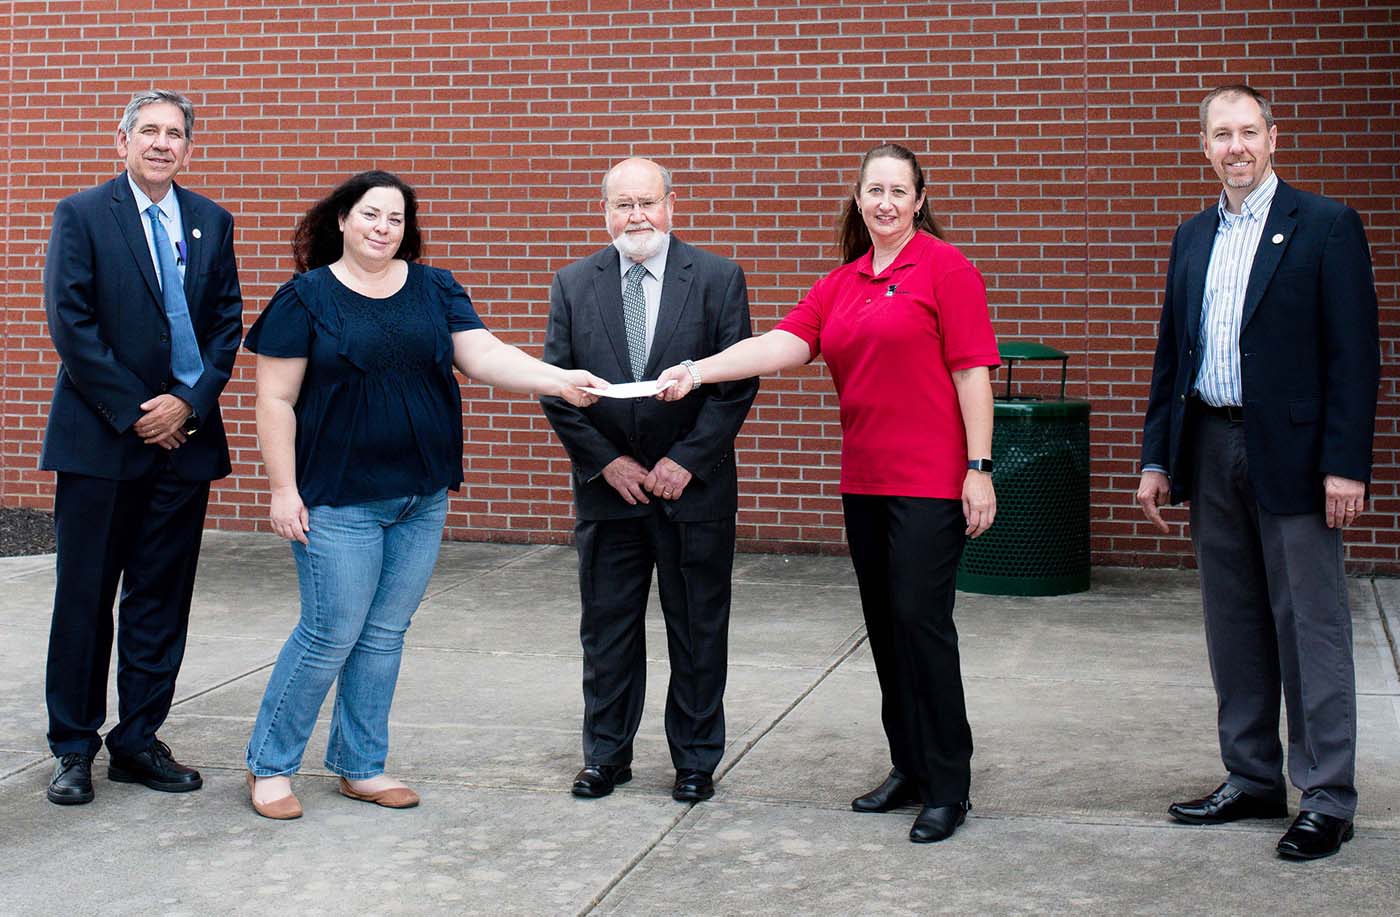 Jennifer Stone, scholarship chair for the Energy Technology and Environmental Business Association, hands a check from the trade association to Roane State Professor Dr. Sylvia Pastor, who oversees the community college’s involvement in the “Lab-In-A-Box” initiative. From left: Bill Moore, executive director of ETEBA; Stone; Barry Stephenson of Materials & Chemistry Laboratory Inc. and chairman of the Roane State Foundation Board of Directors; Dr. Pastor; and Scott Niermann, executive director of the Roane State Foundation.